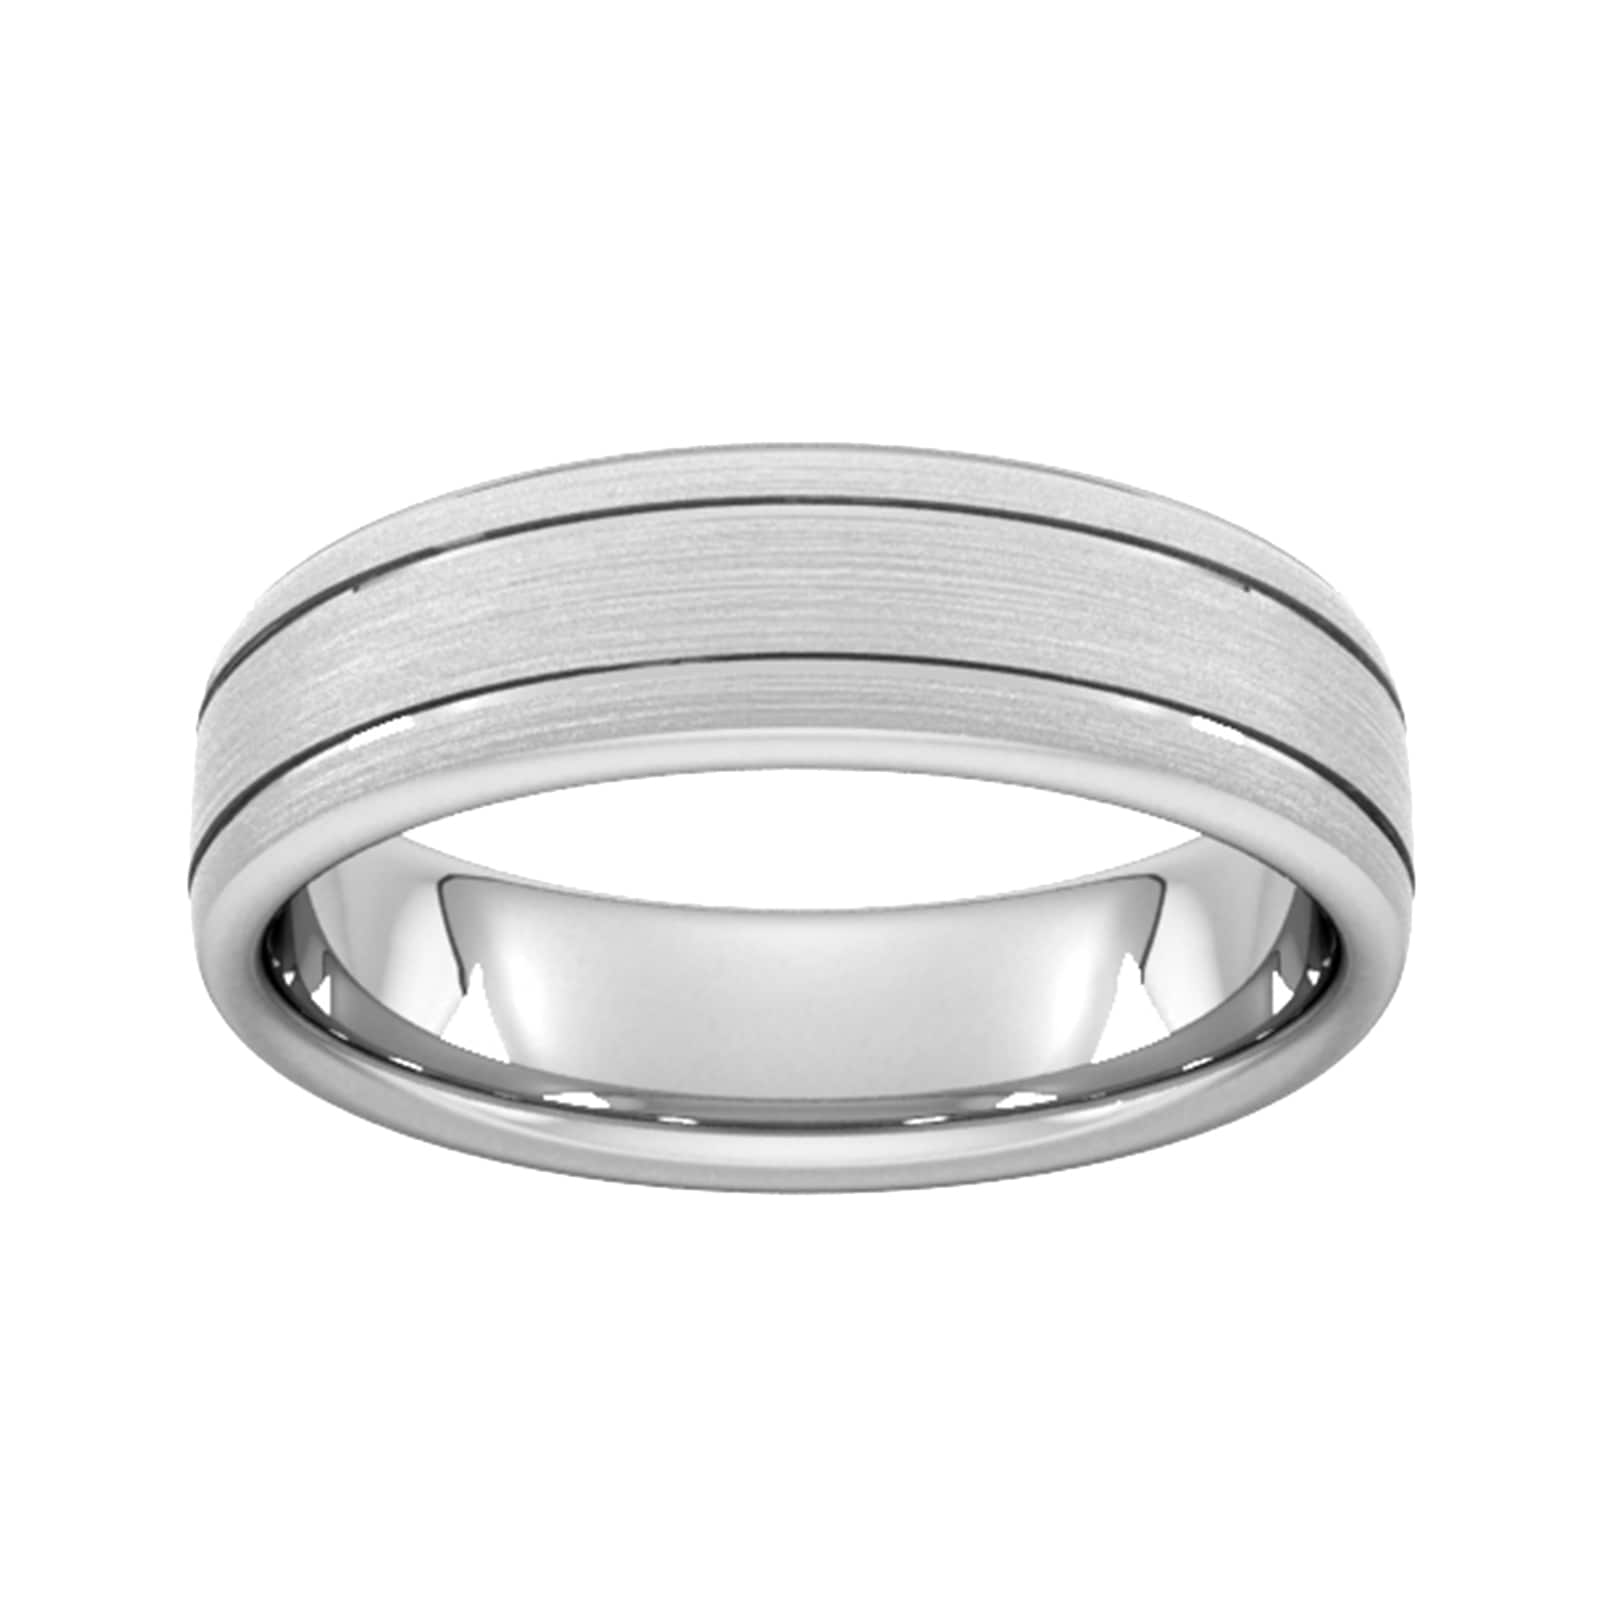 6mm Slight Court Extra Heavy Matt Finish With Double Grooves Wedding Ring In 18 Carat White Gold - Ring Size W